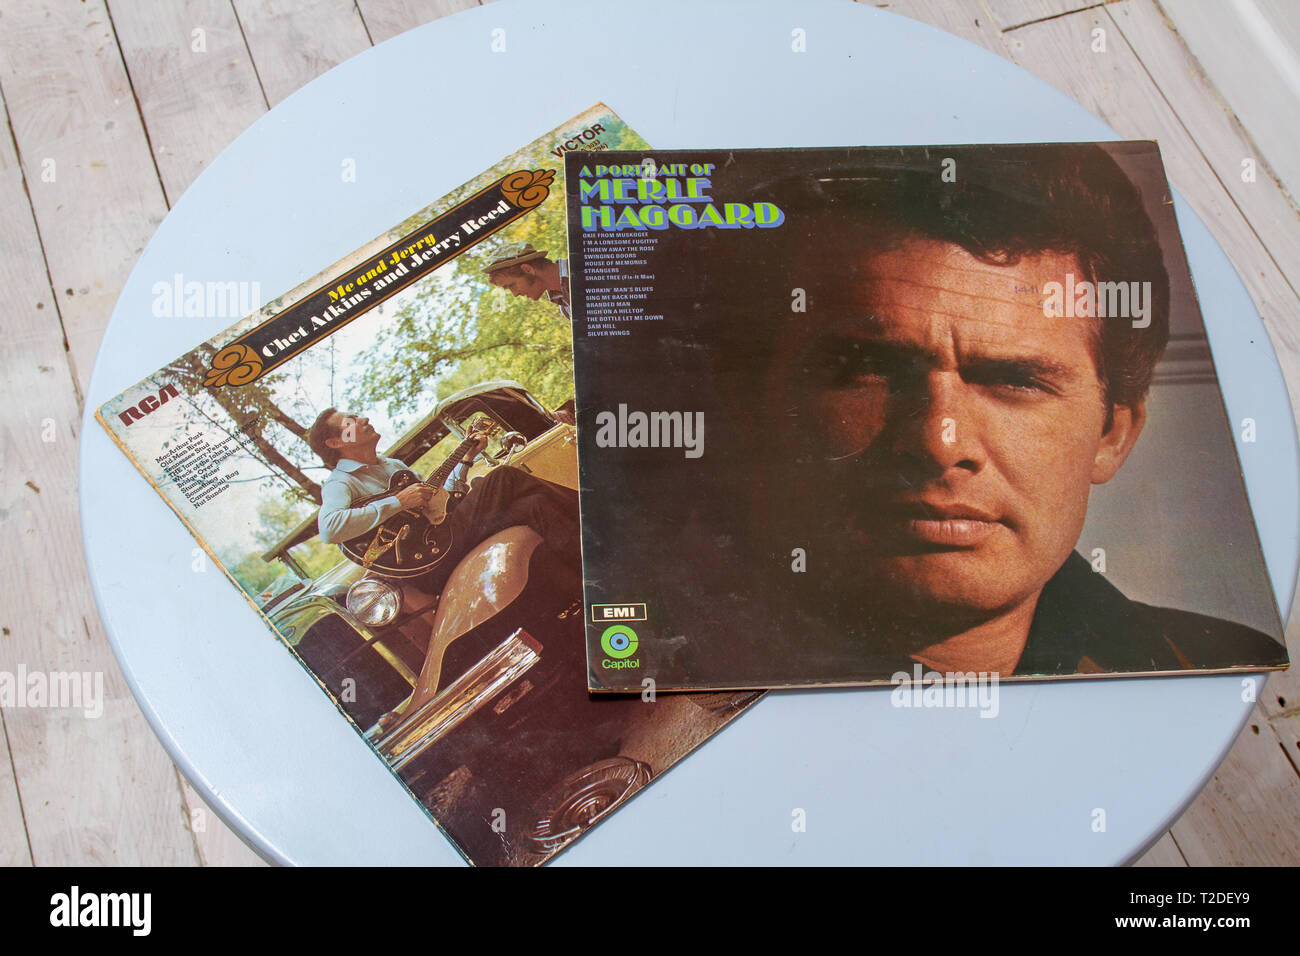 Album covers Merle Haggard's 1969 release 'A Portrait of Merle Haggard' and the Jerry Reed and Chet Atkins 1970 collaboration 'Me and Jerry'. Stock Photo